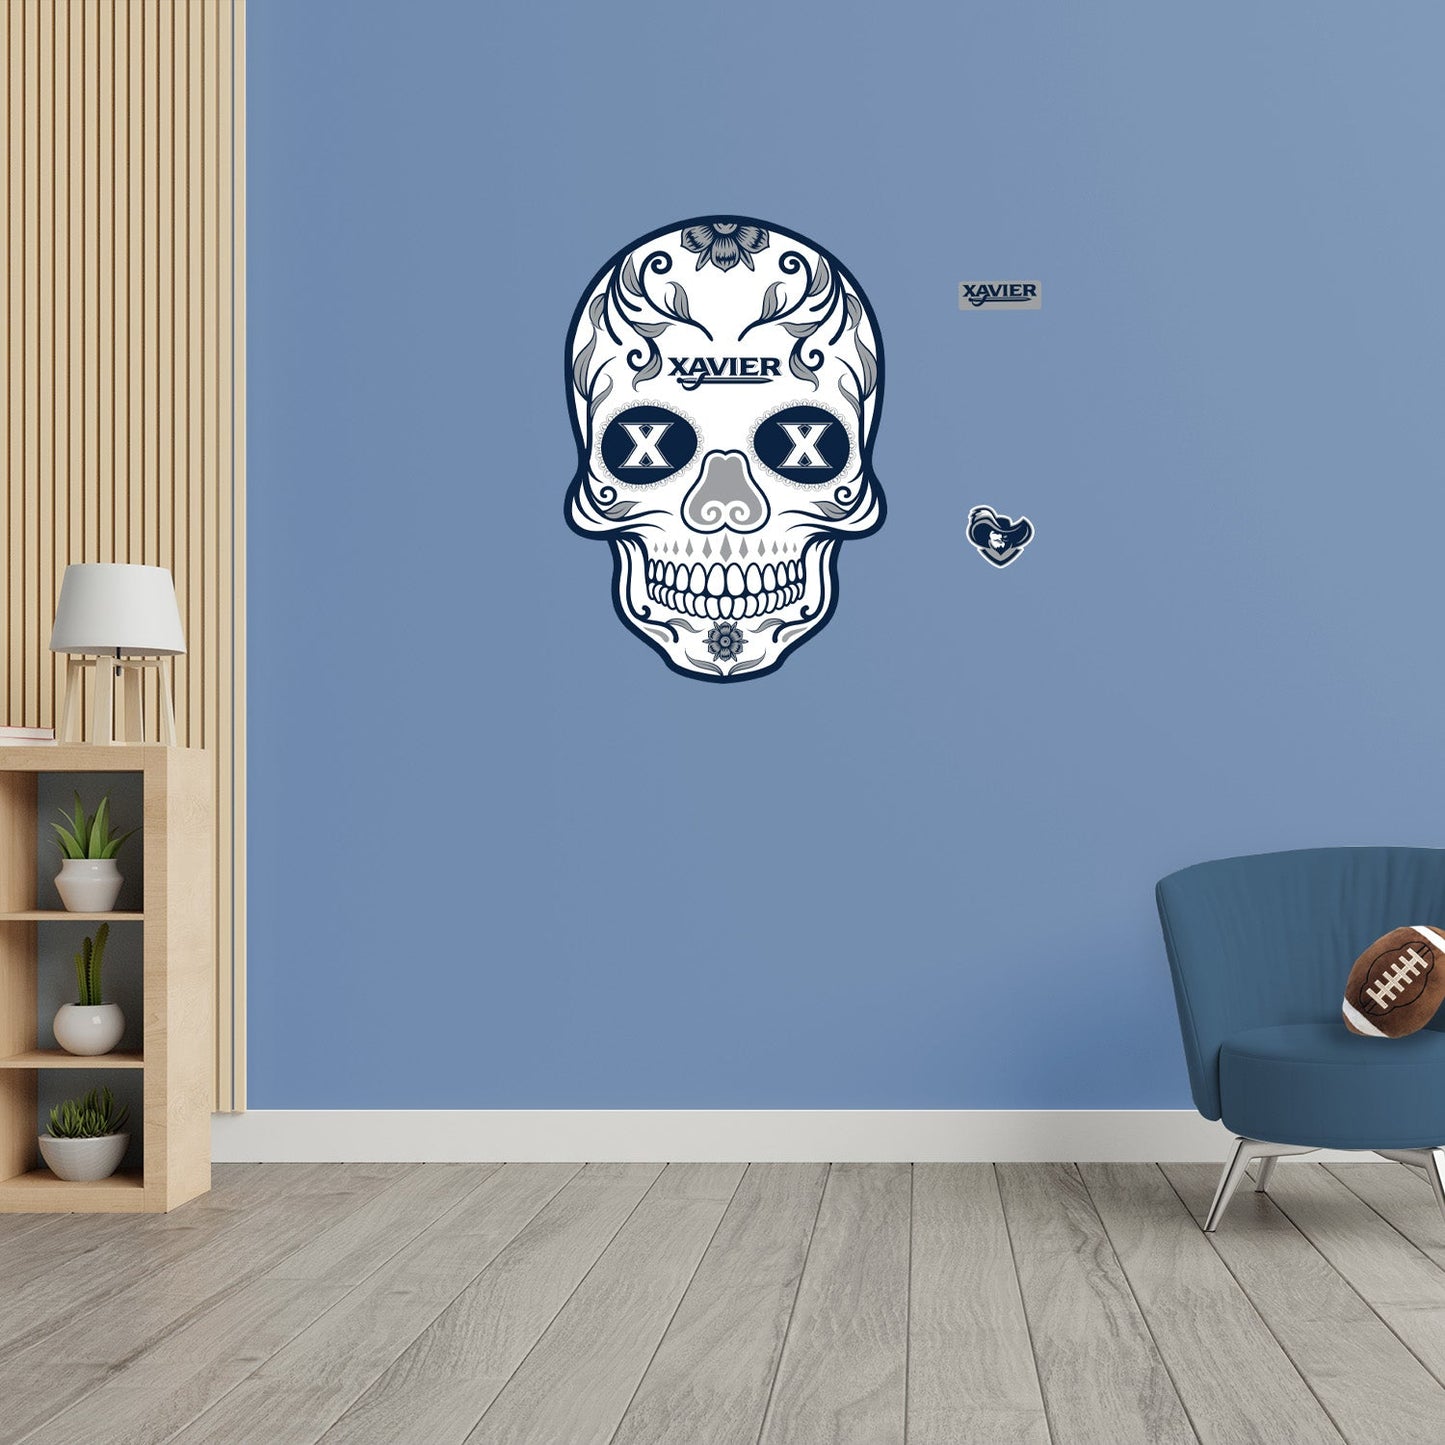 Xavier Musketeers: Skull - Officially Licensed NCAA Removable Adhesive Decal